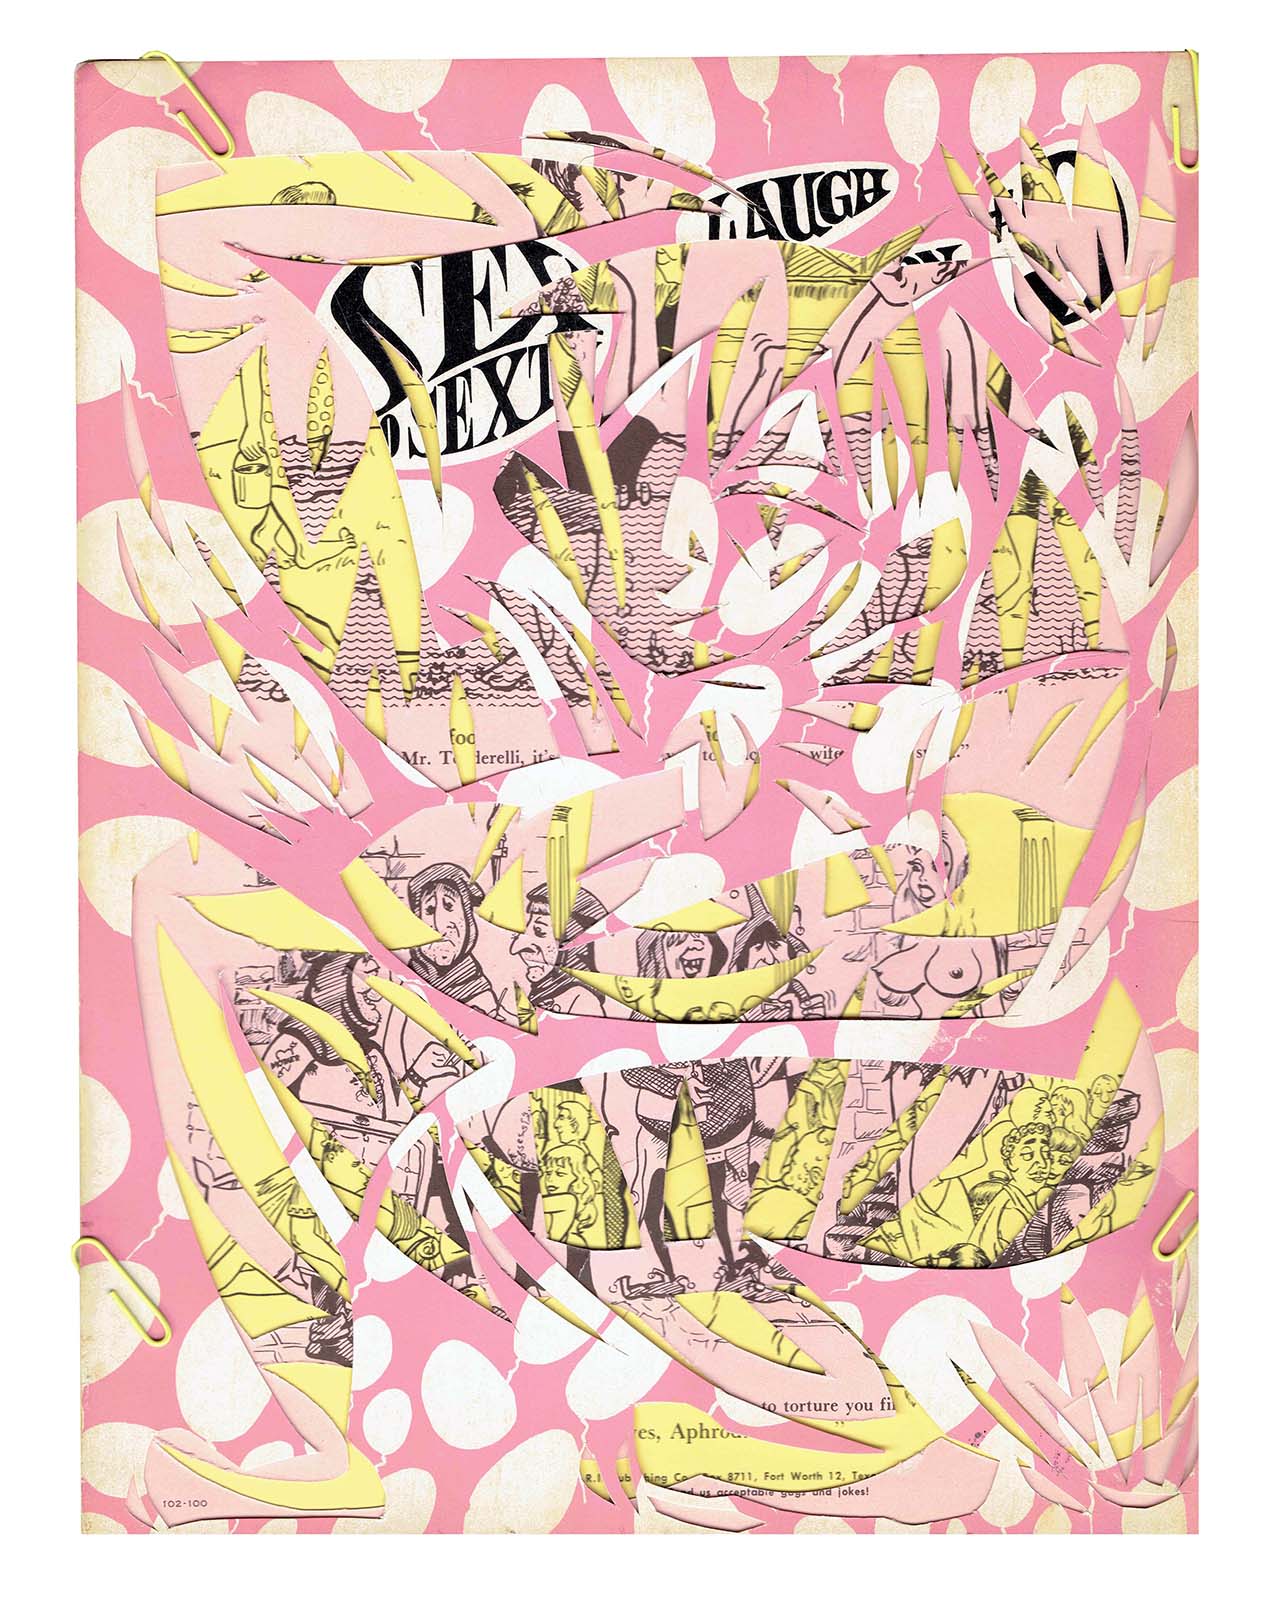 Chris Williford, Summer School (Sex Laugh) (2019), Collage with vintage magazine covers, colored paperclips